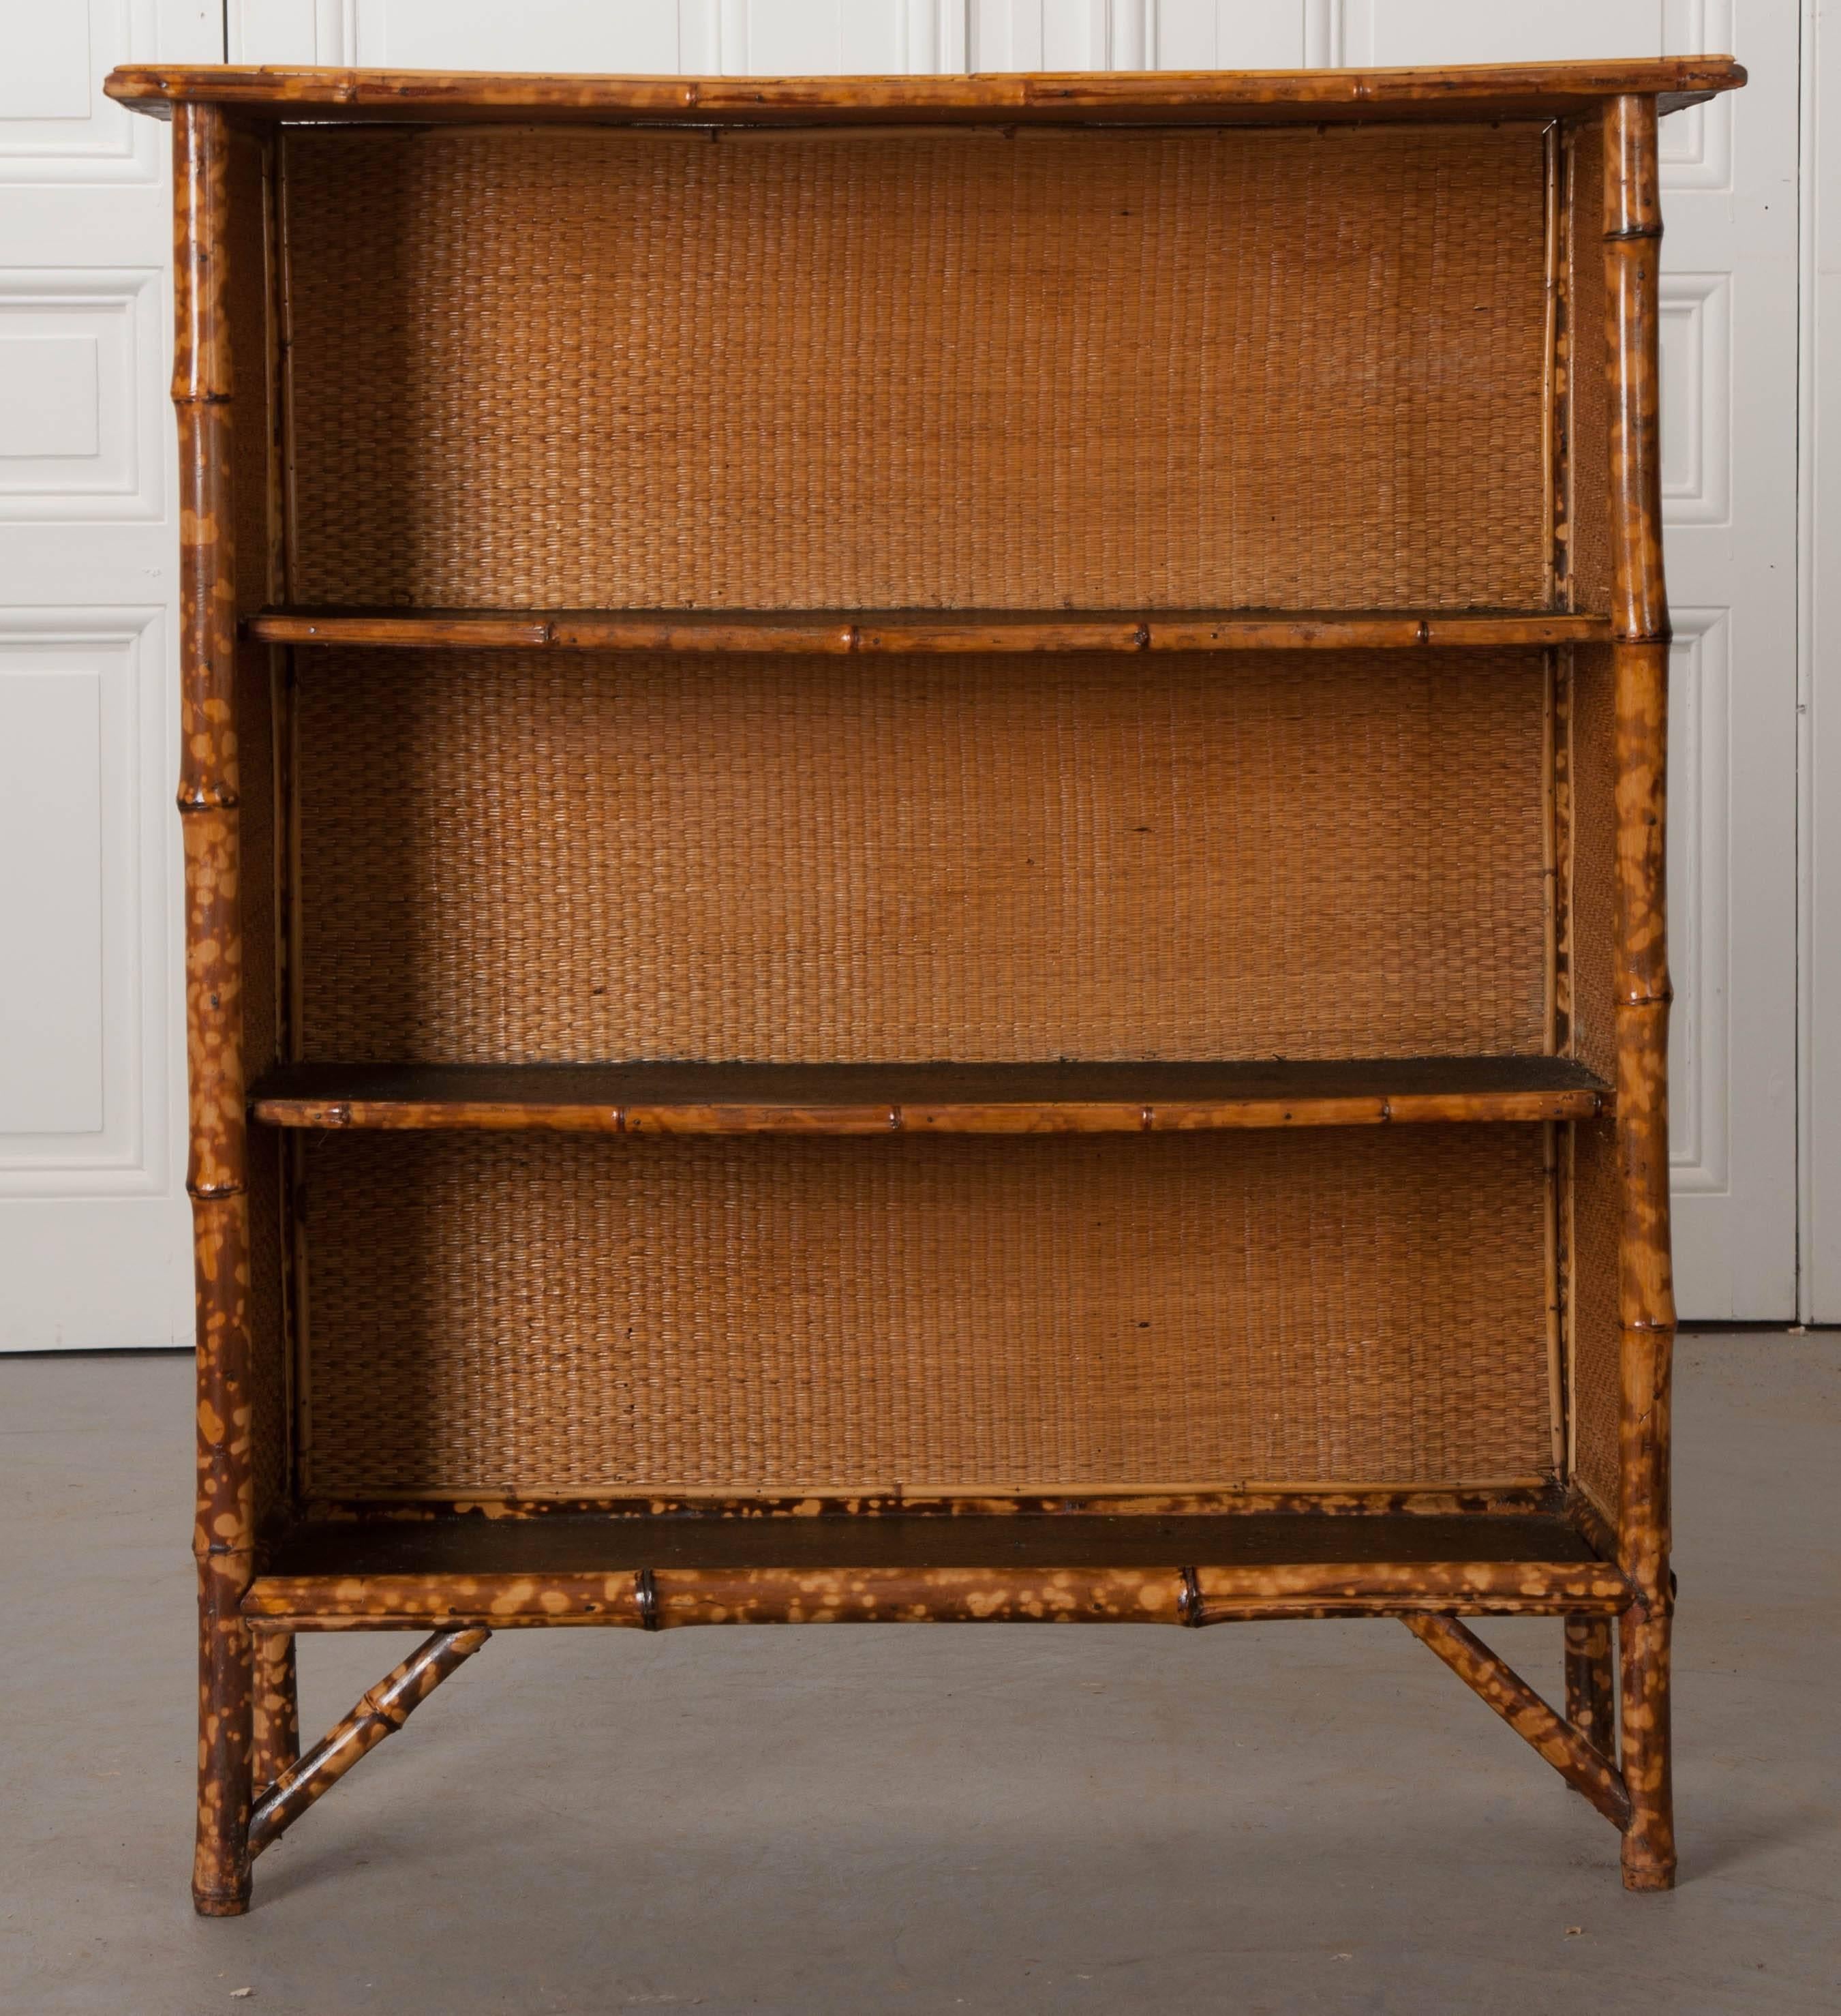 A wonderful English bamboo bookshelf from the 1890s, that has been recently refinished. It has been finished in a gorgeous black and gold découpage. The woven seagrass found in the interior is remarkably intact. This small bookcase has two center